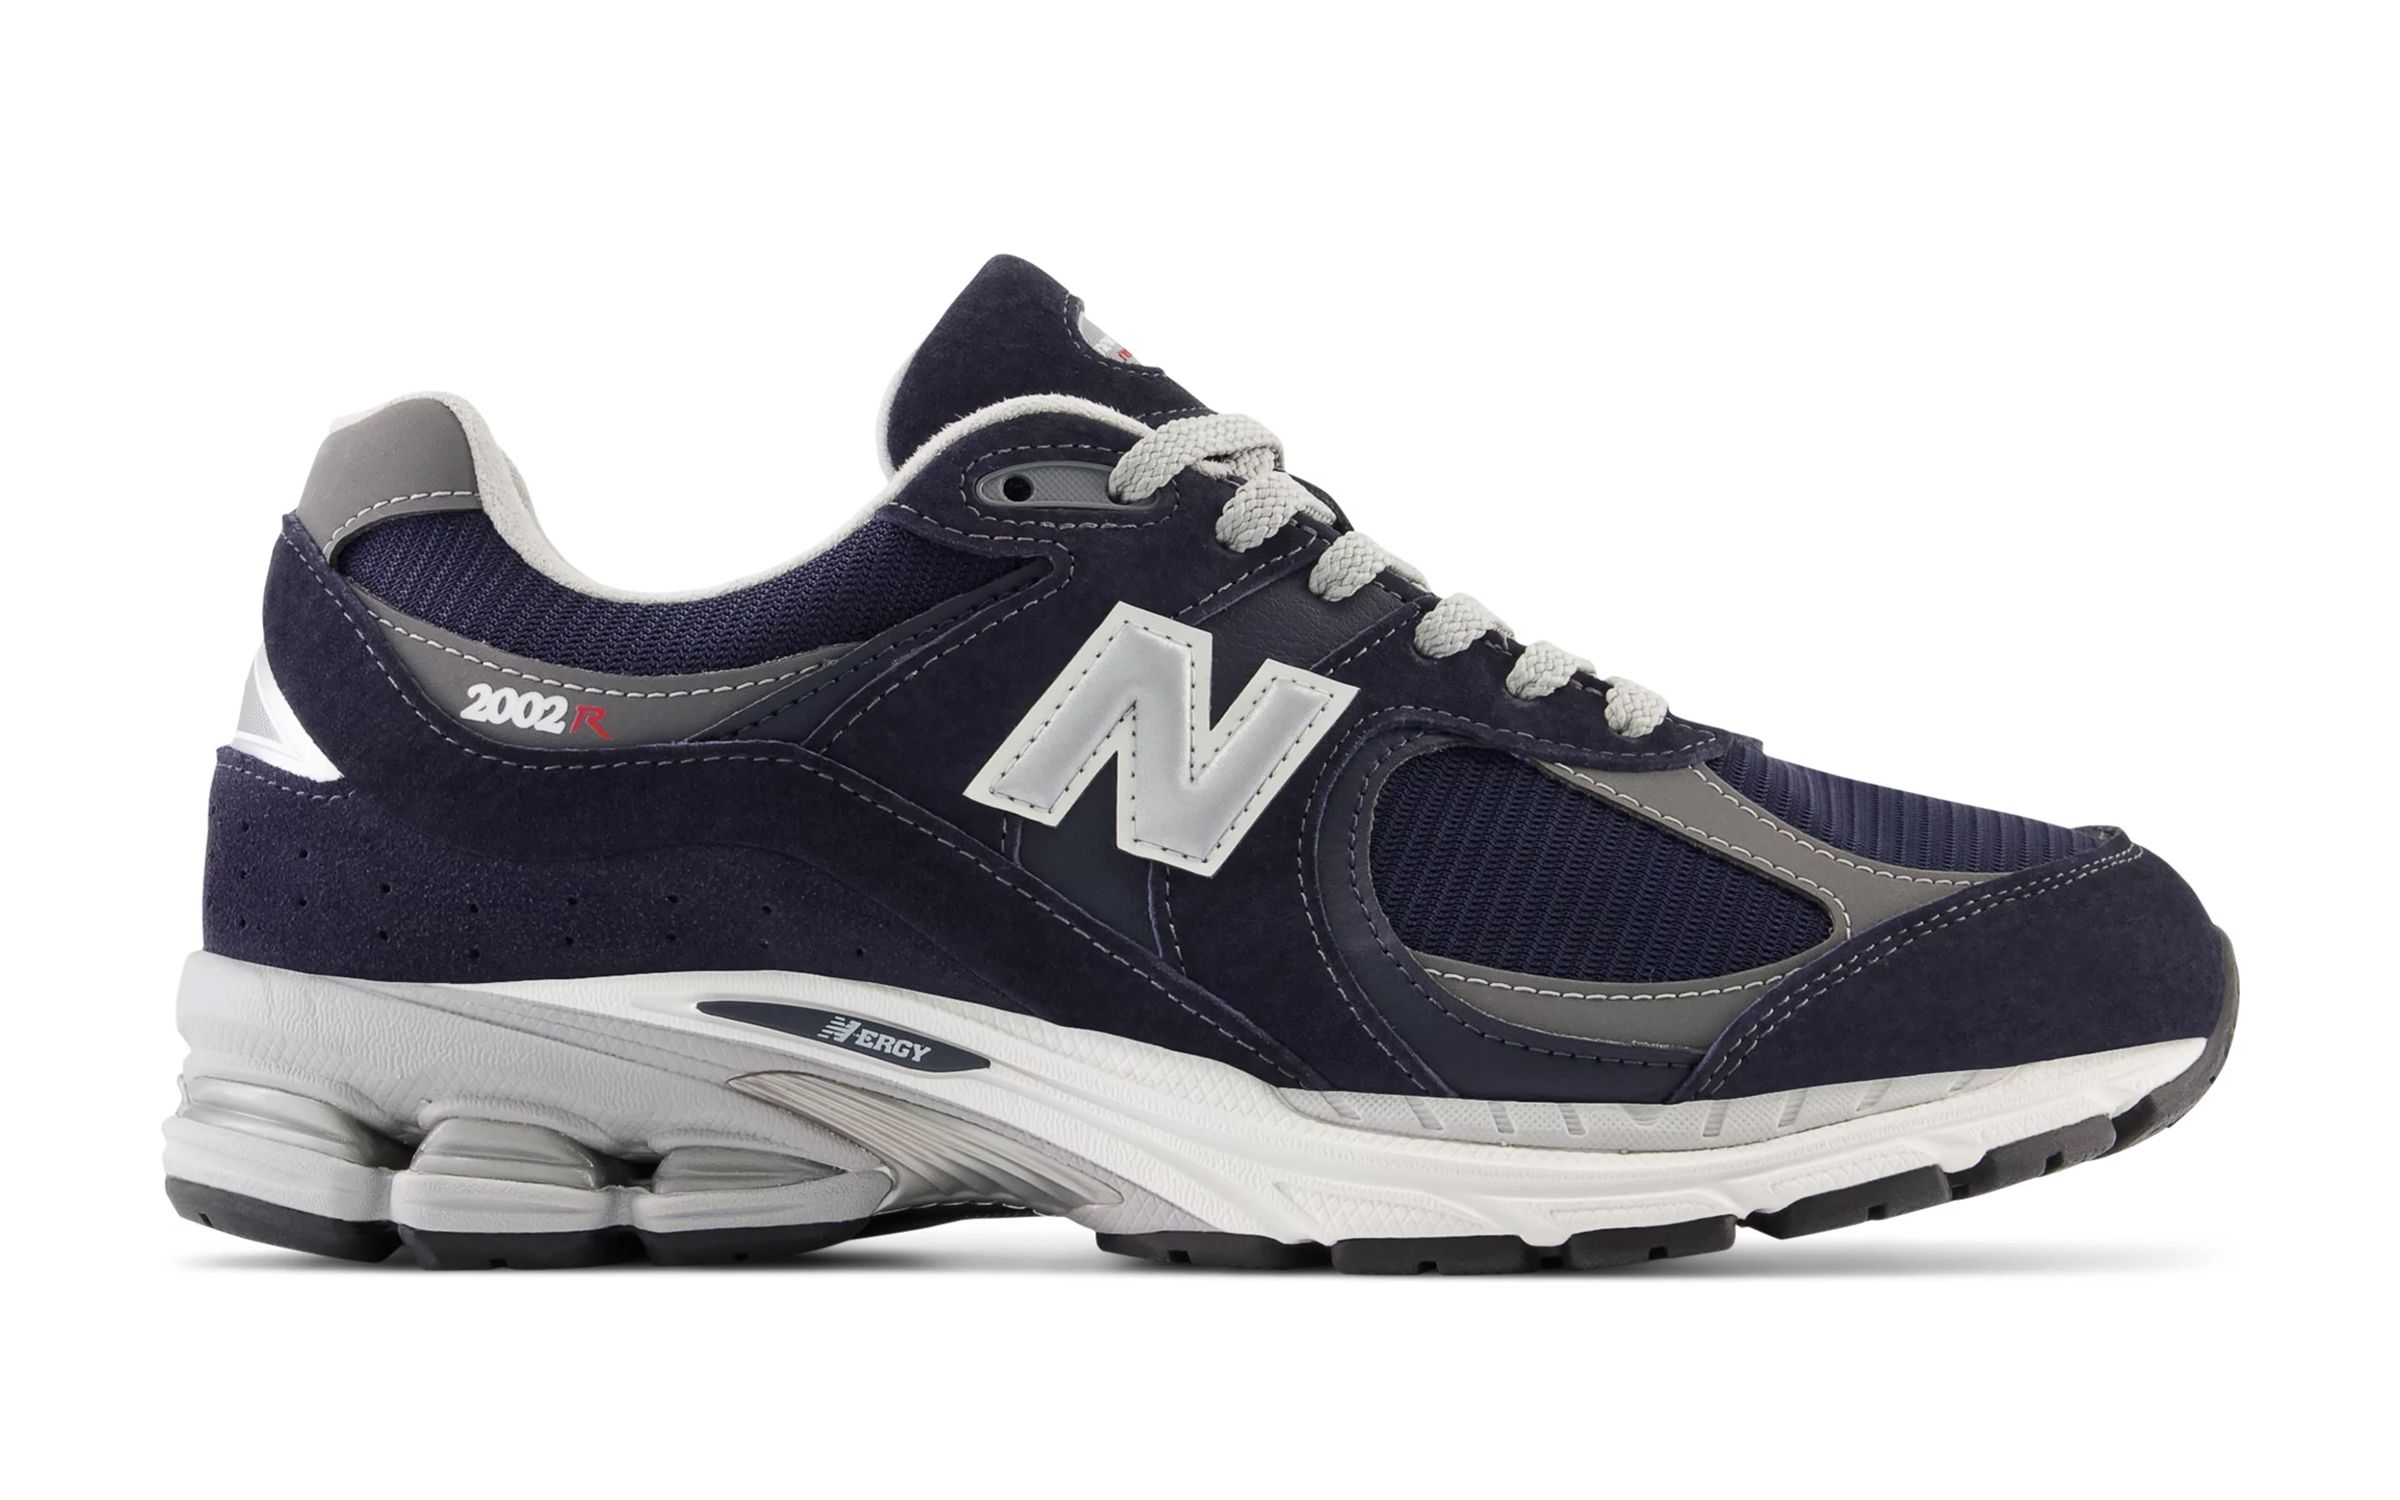 The New Balance 2002R GORE-TEX Returns in Three Color Options ...